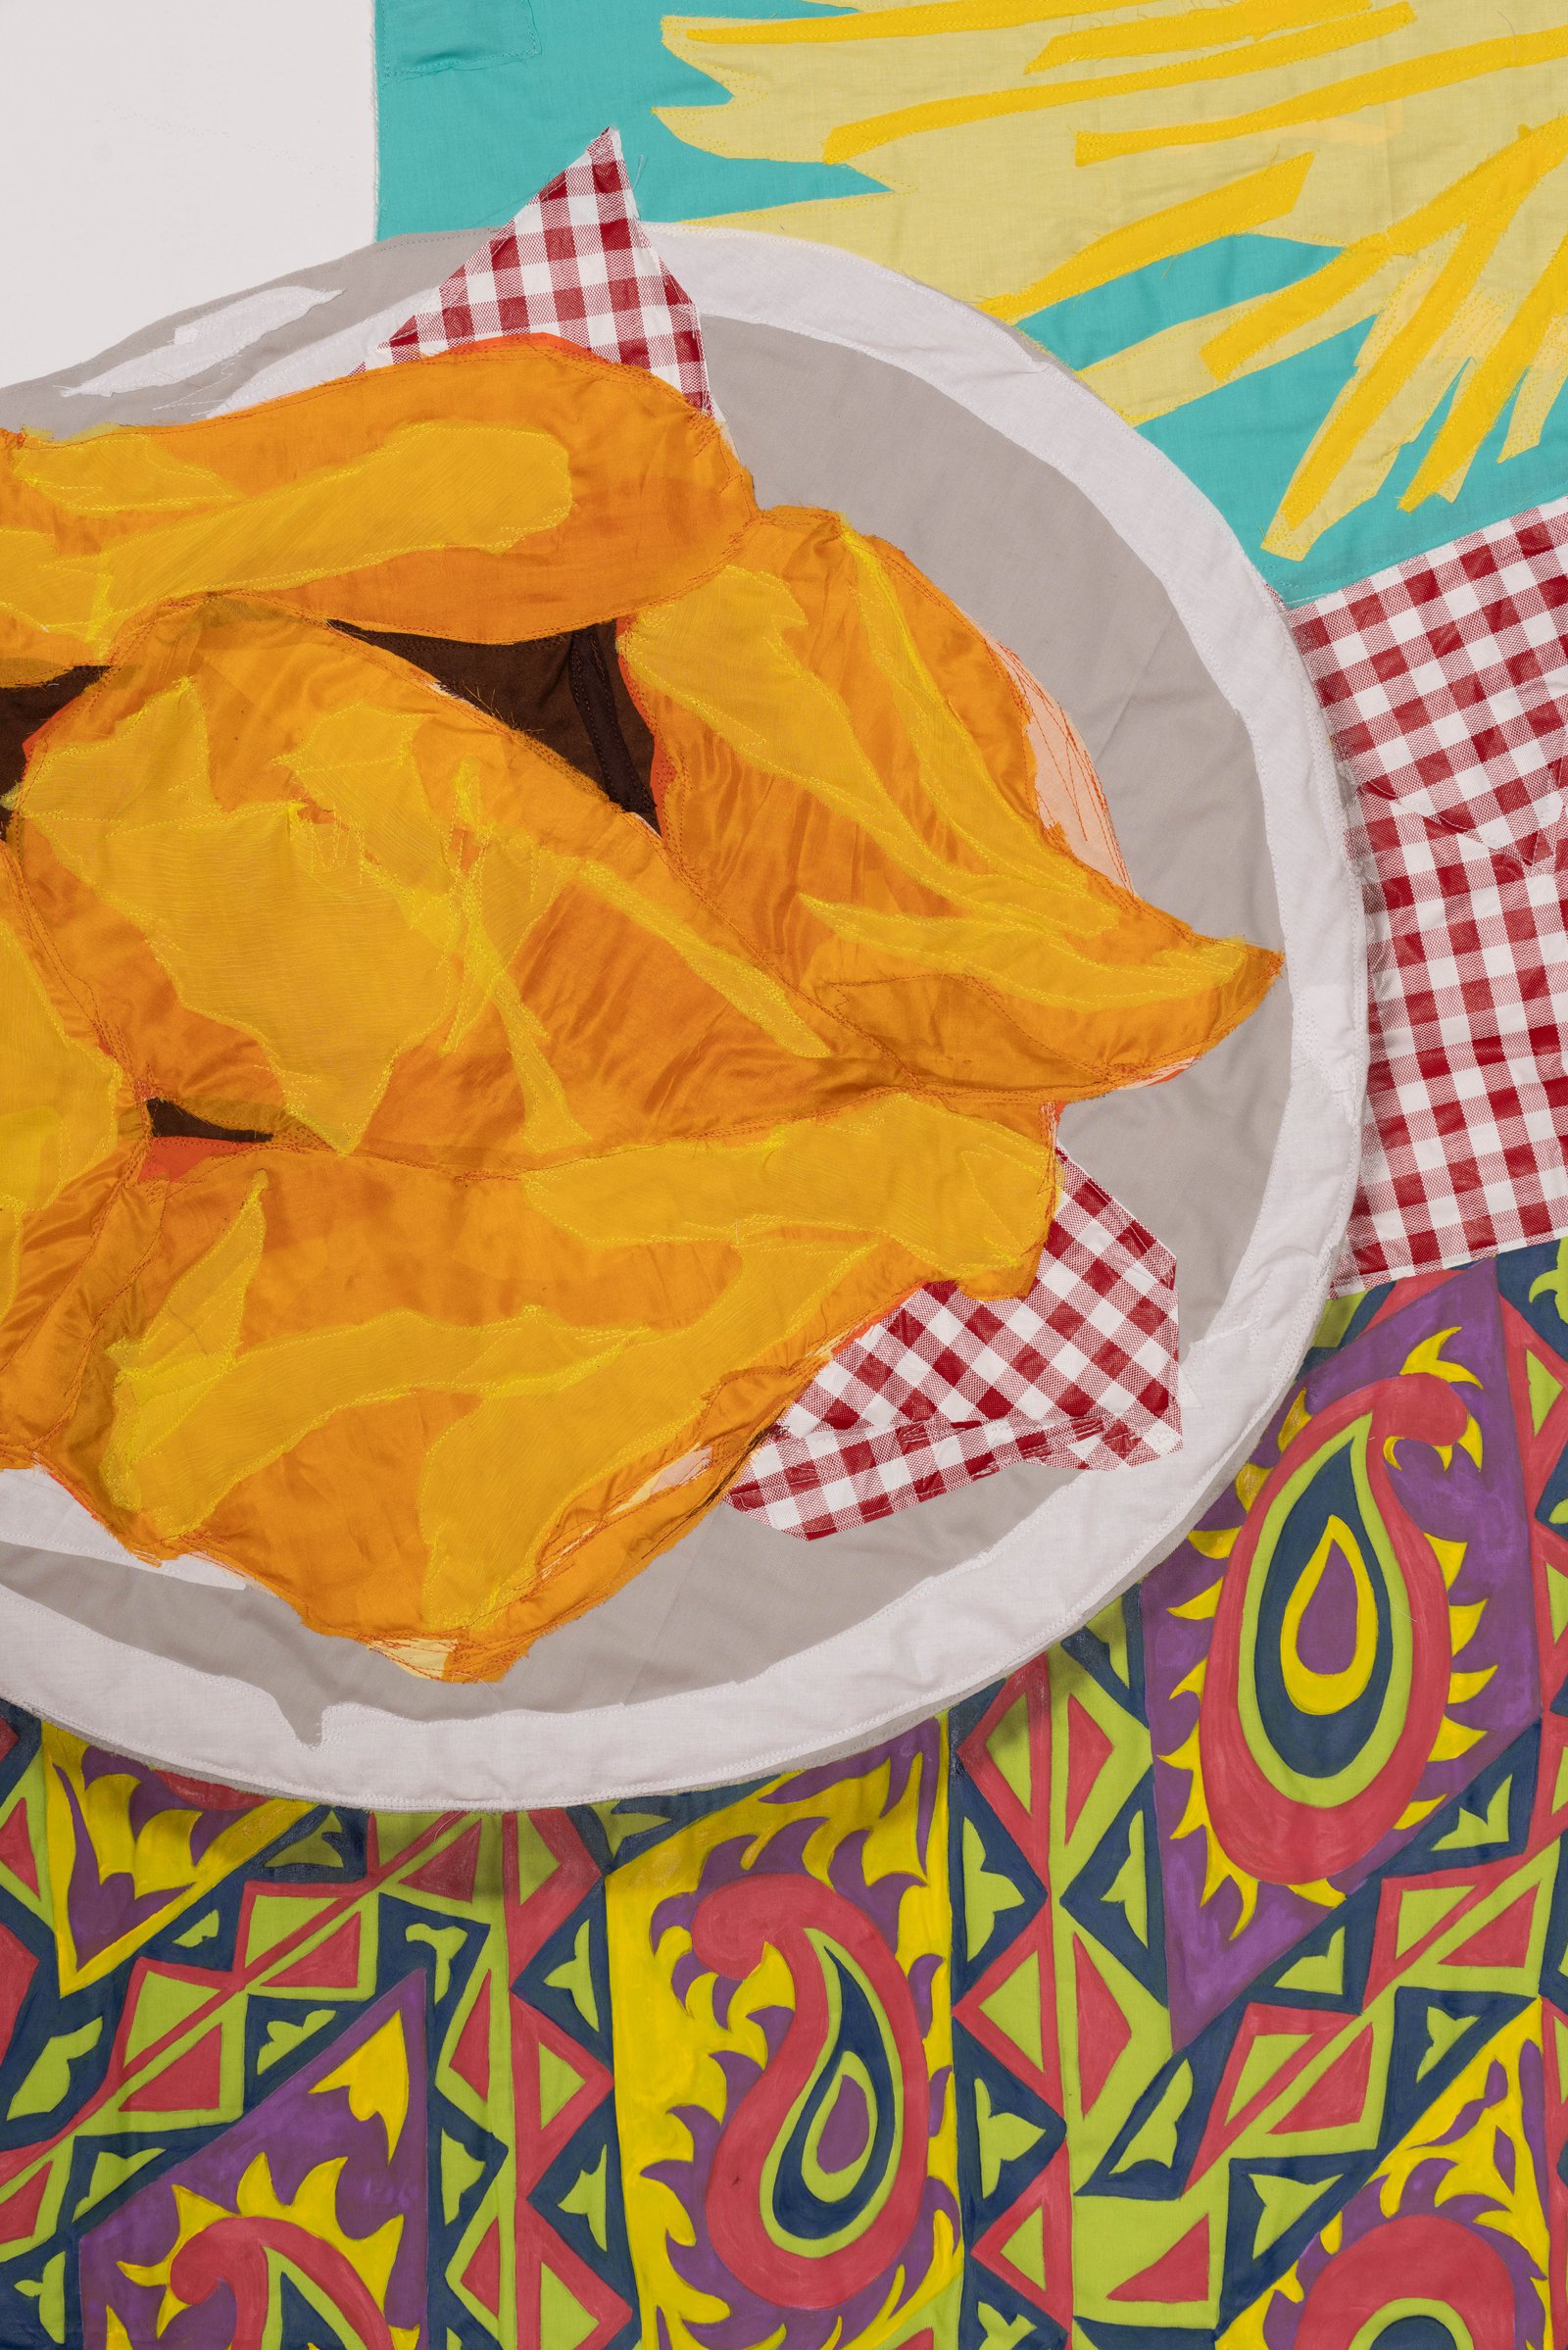 Hangama Amiri, Still-Life with Fried Chicken and Fries, 2021Chiffon, muslin, cotton, polyester, silk, acrylic paint, and found fabric, 114.30 × 99.06 cm (45 × 39 in)Courtesy of the artist and T293 Gallery